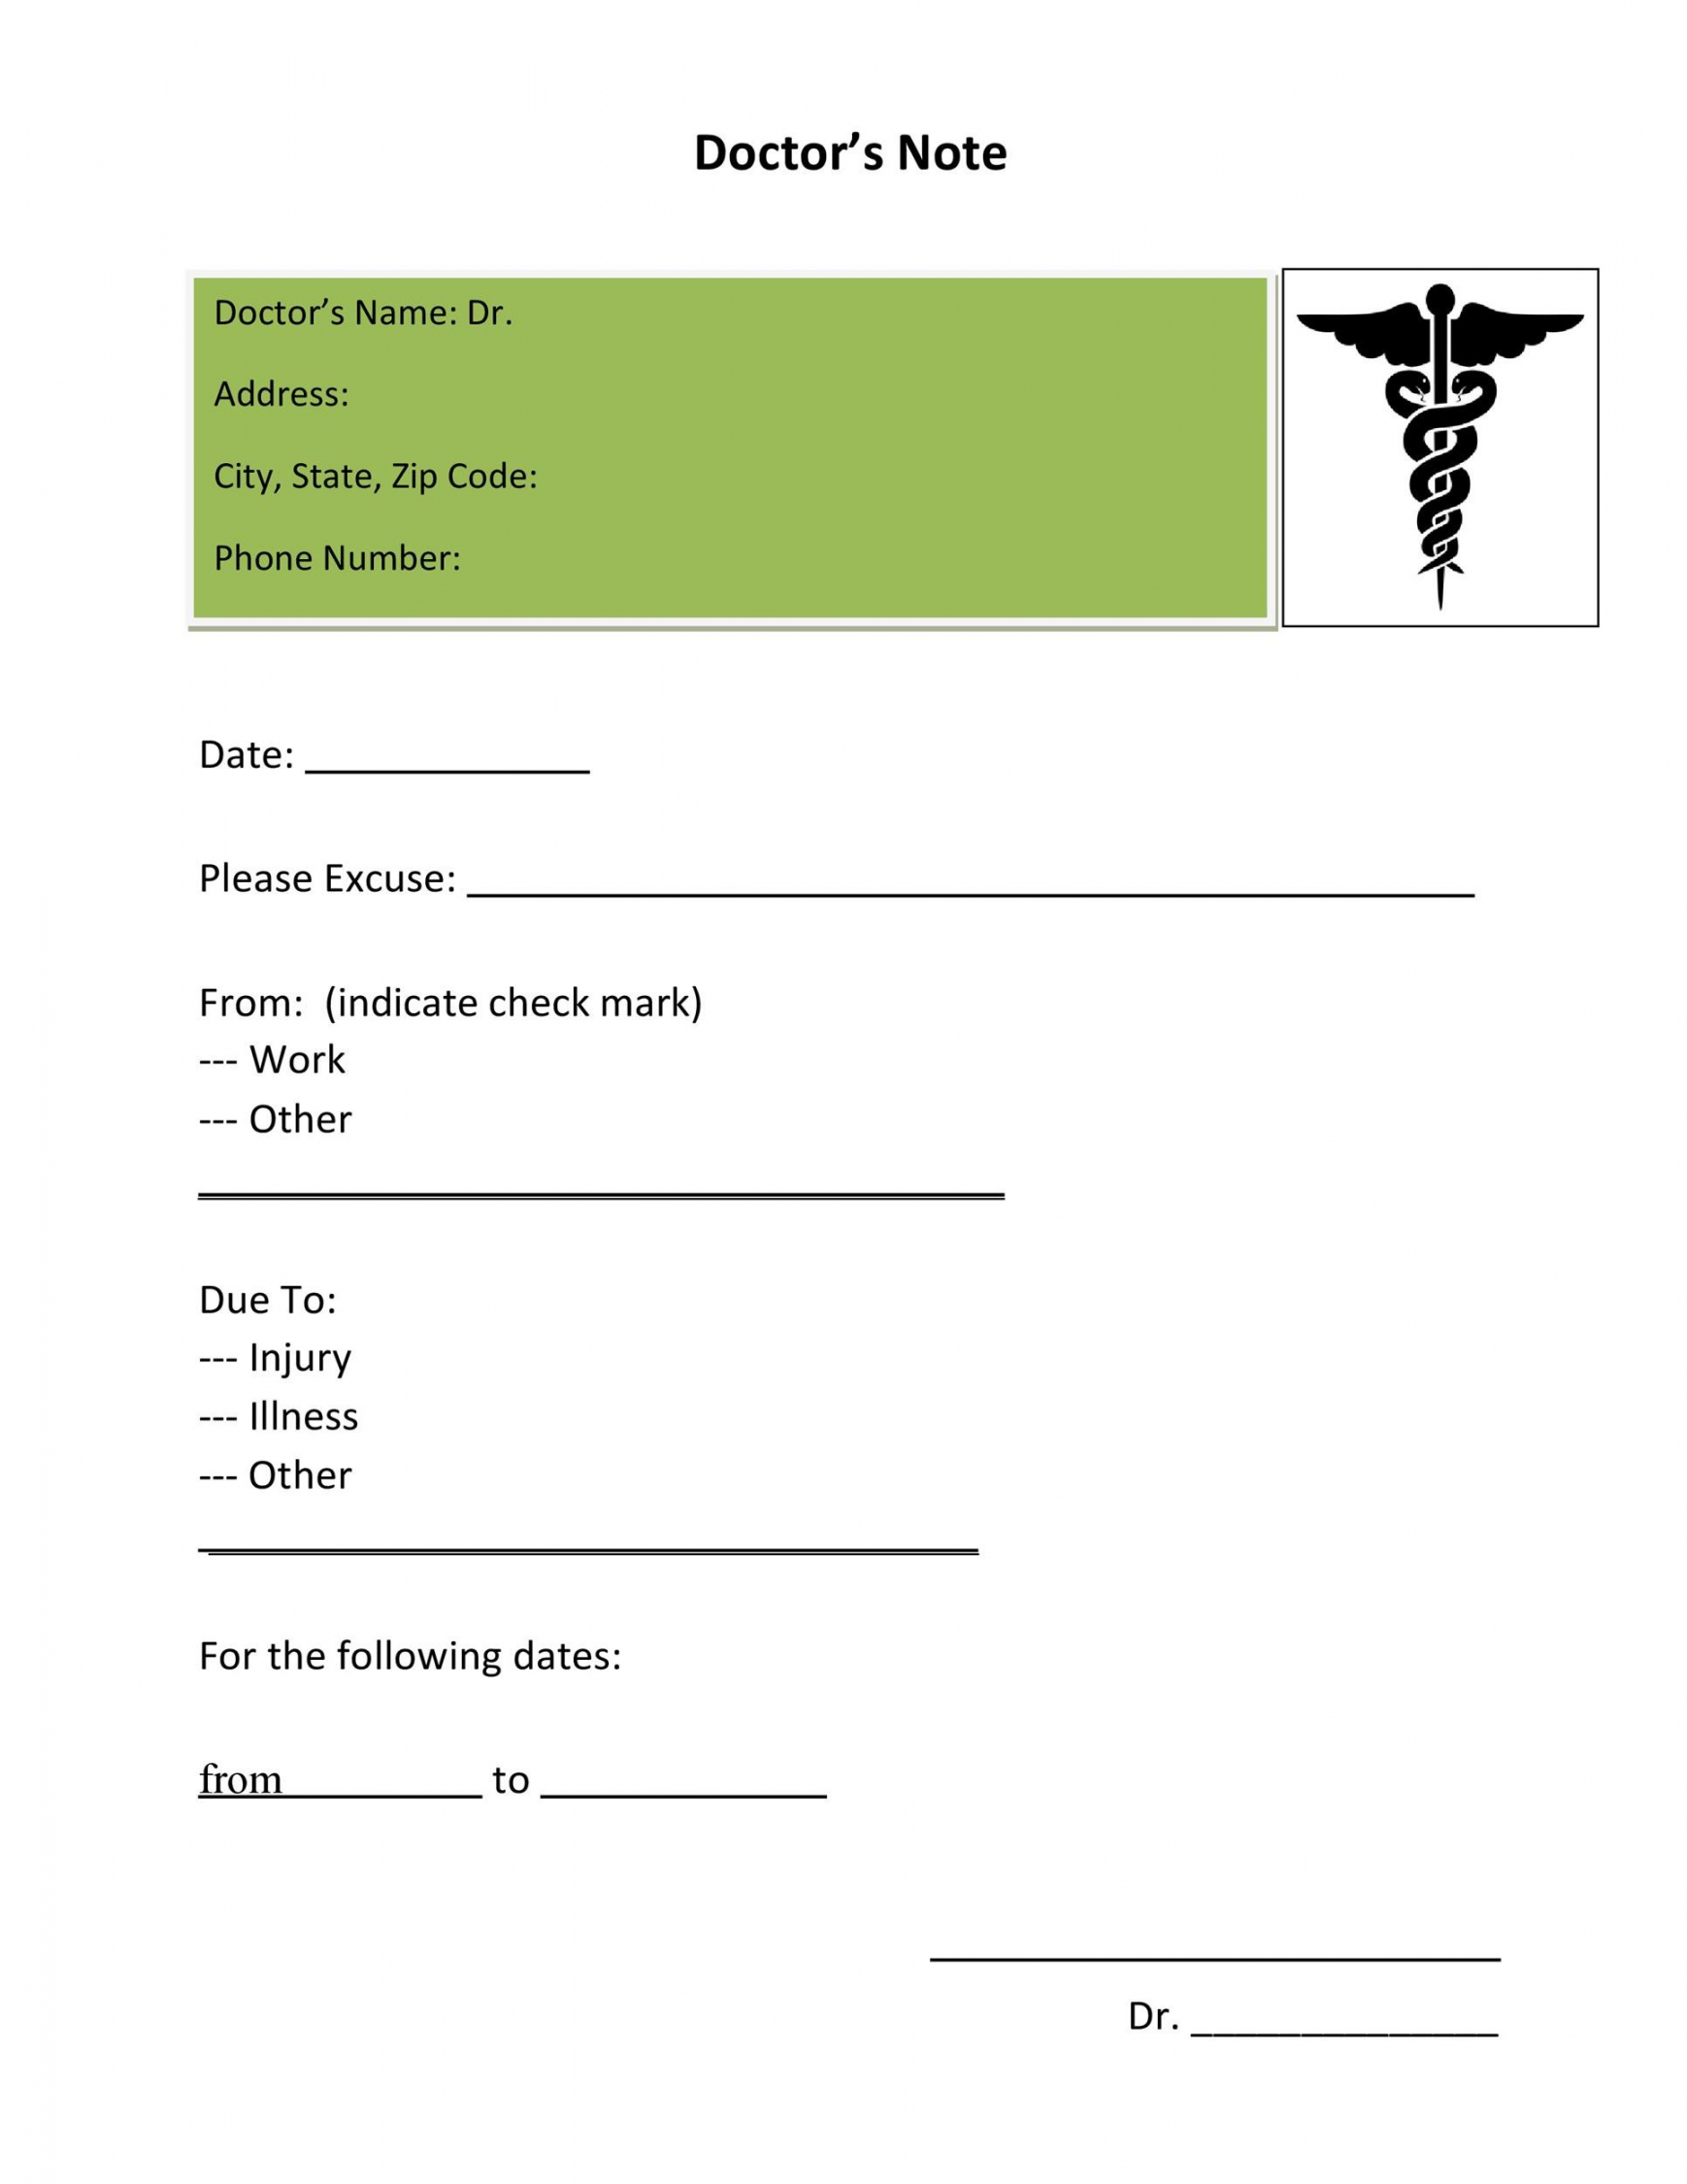 Free Printable Doctors Note For Work - Printable -  Free Doctor Note Templates [for Work or School]